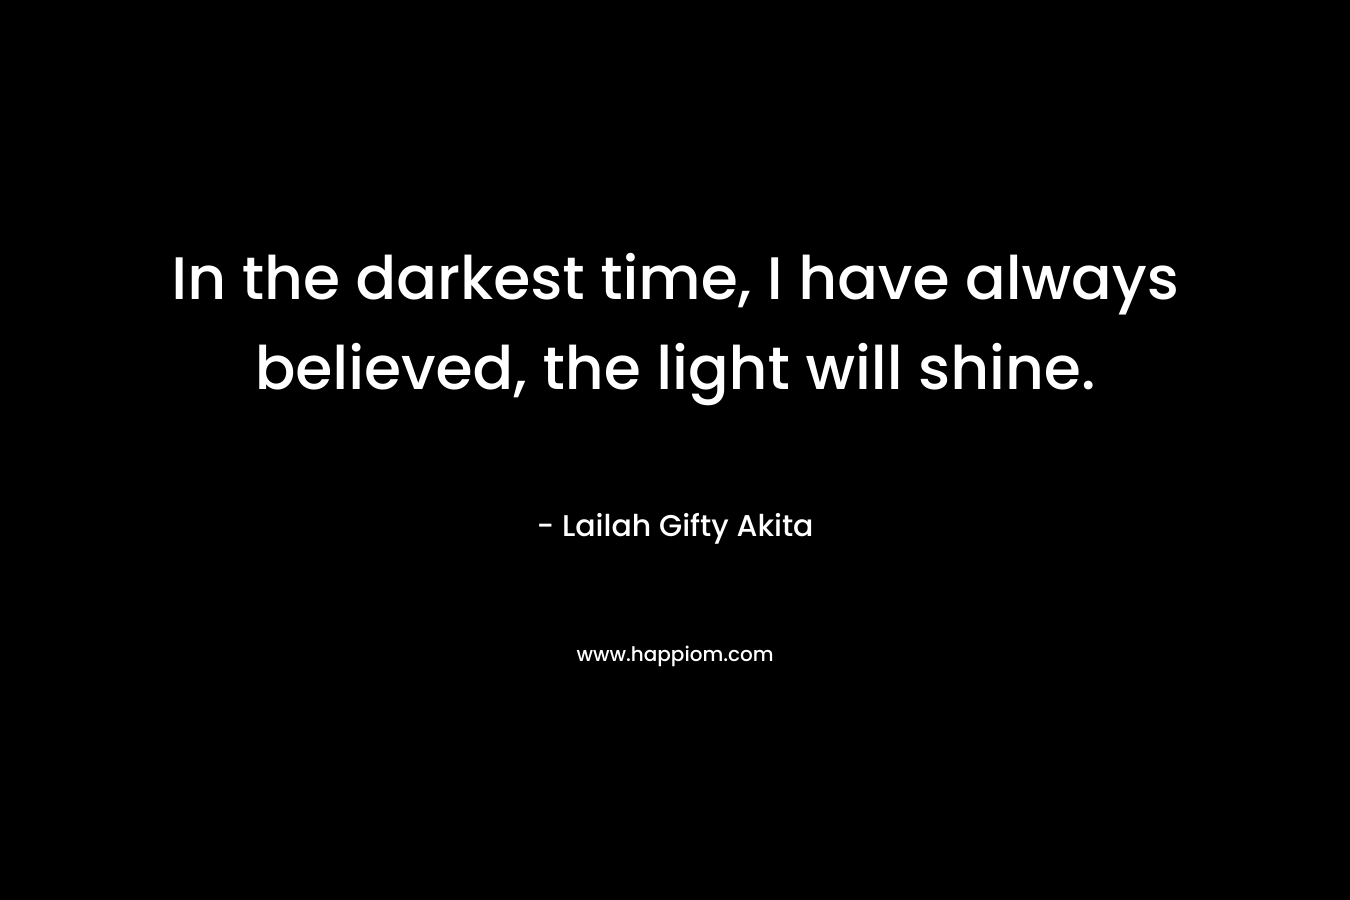 In the darkest time, I have always believed, the light will shine.